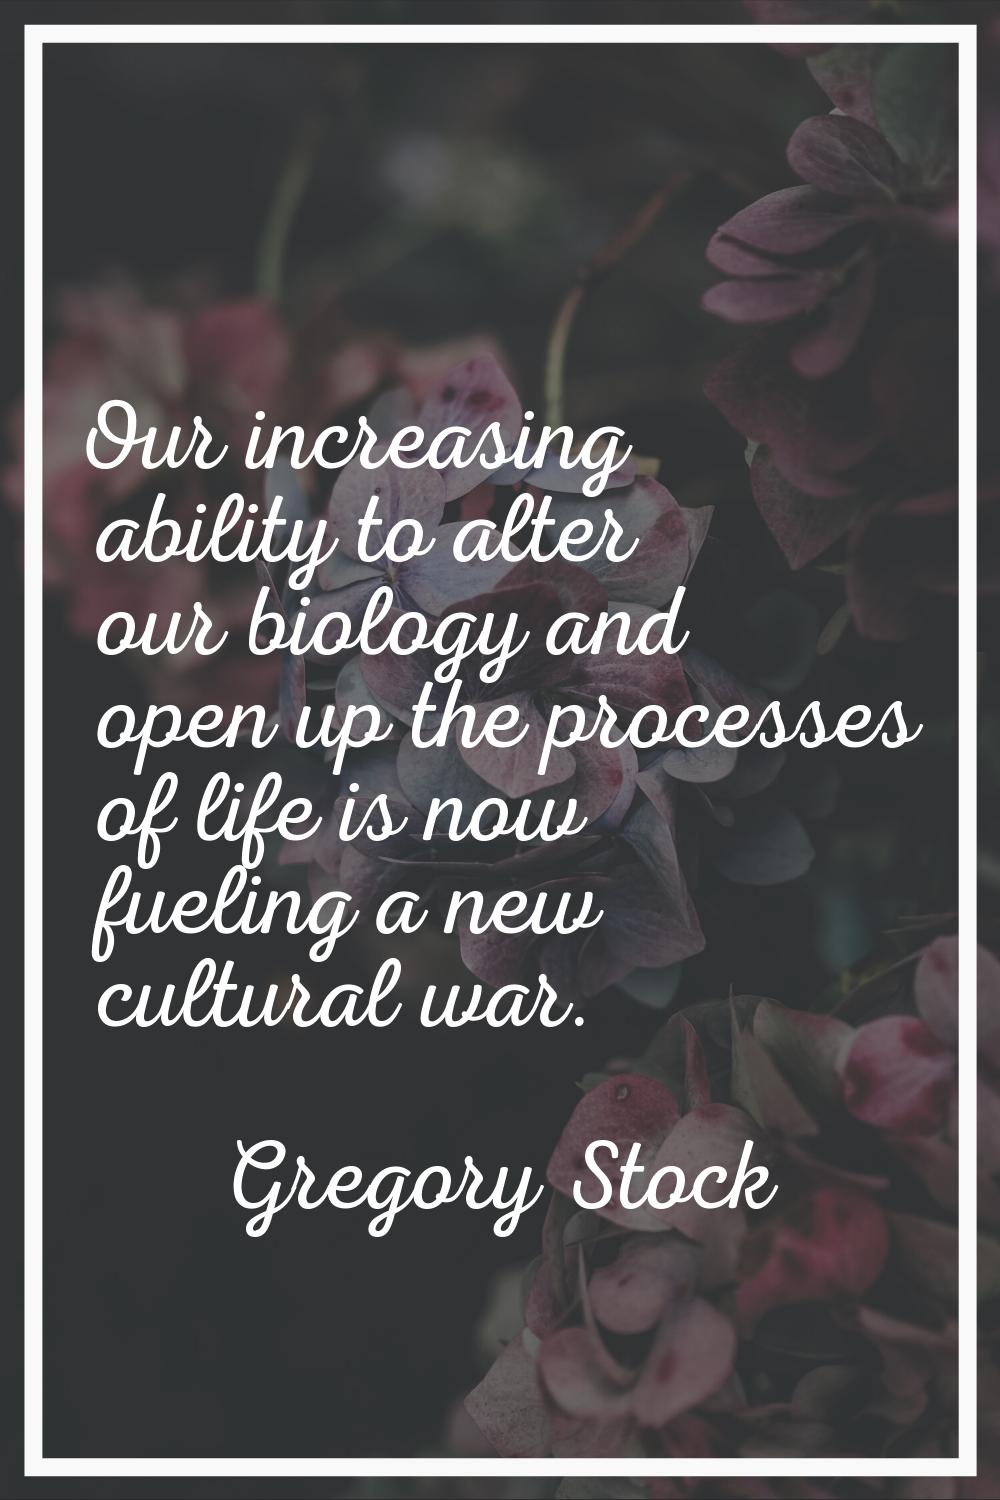 Our increasing ability to alter our biology and open up the processes of life is now fueling a new 